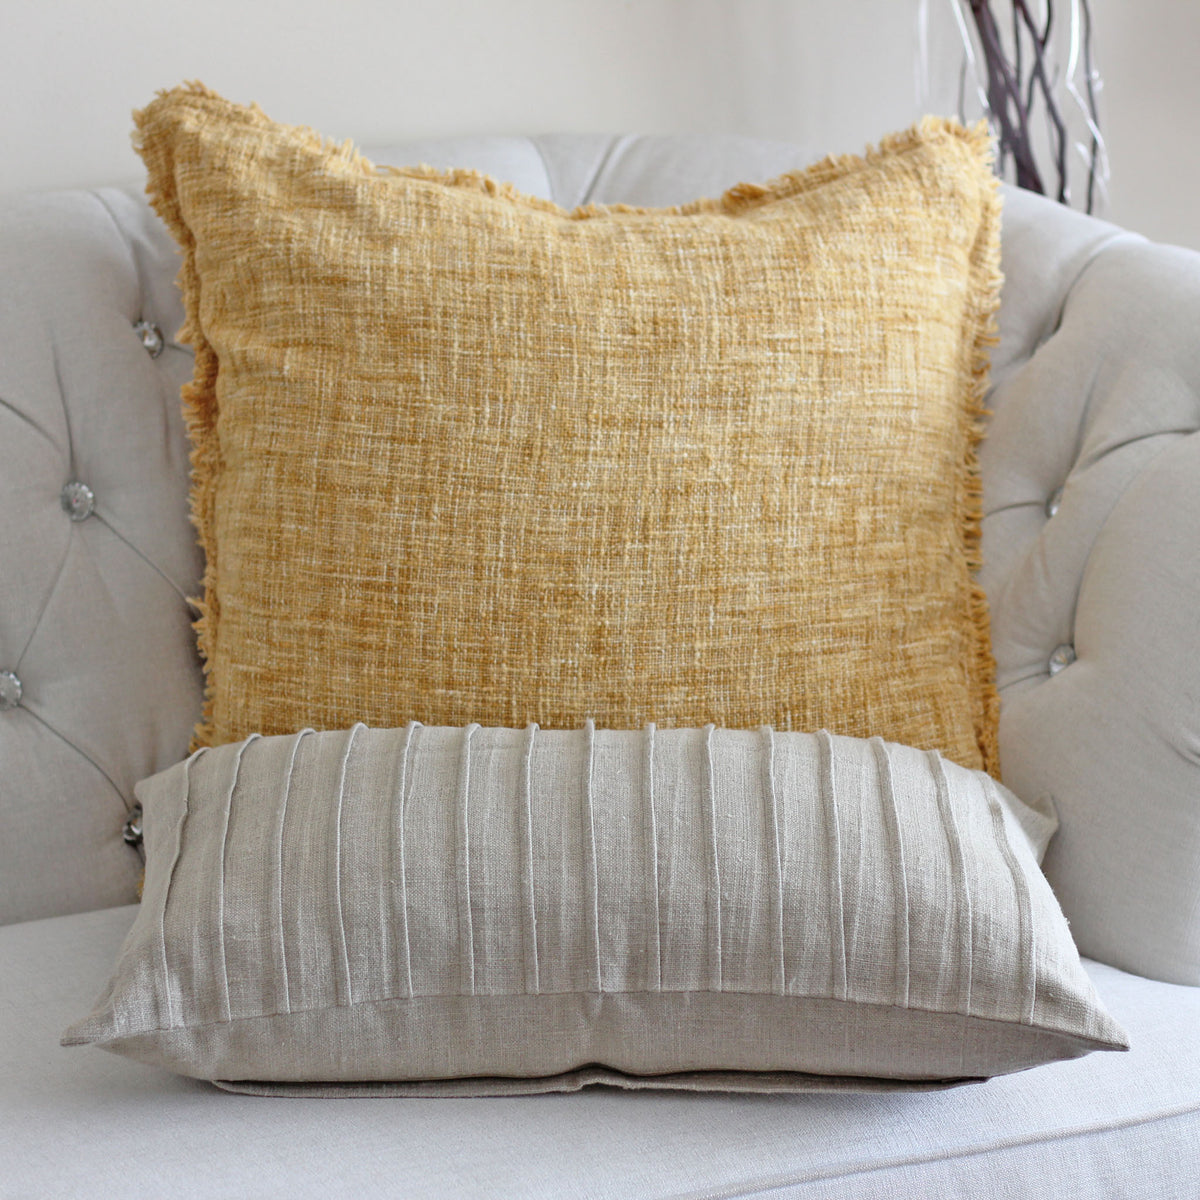 Handcrafted Linen Throw Pillow Cover - Pleated Design | Natural Brown